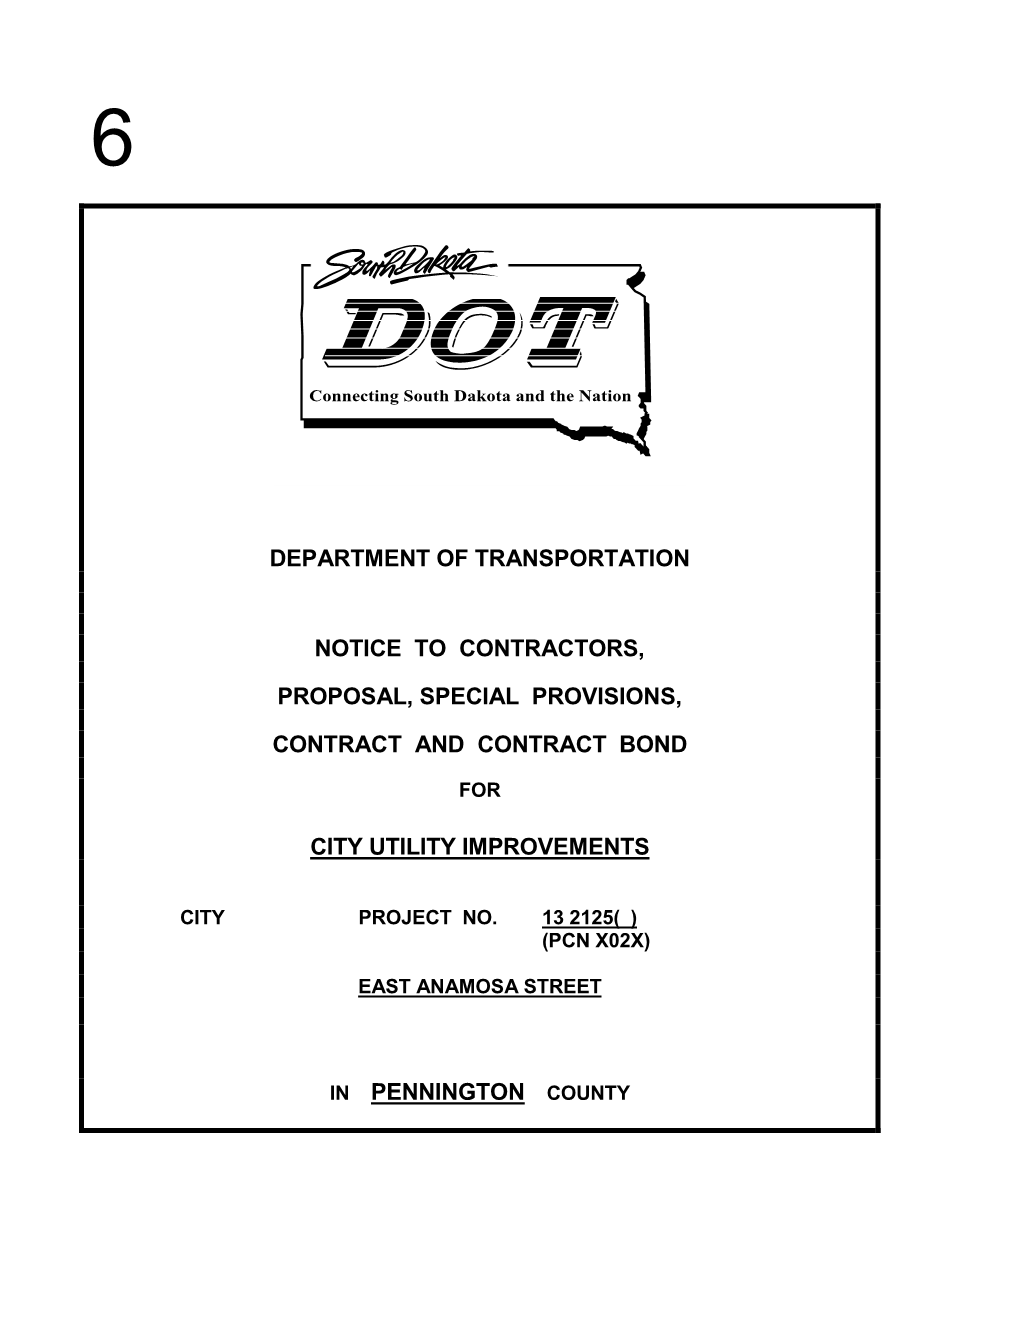 Department of Transportation Notice to Contractors, Proposal, Special